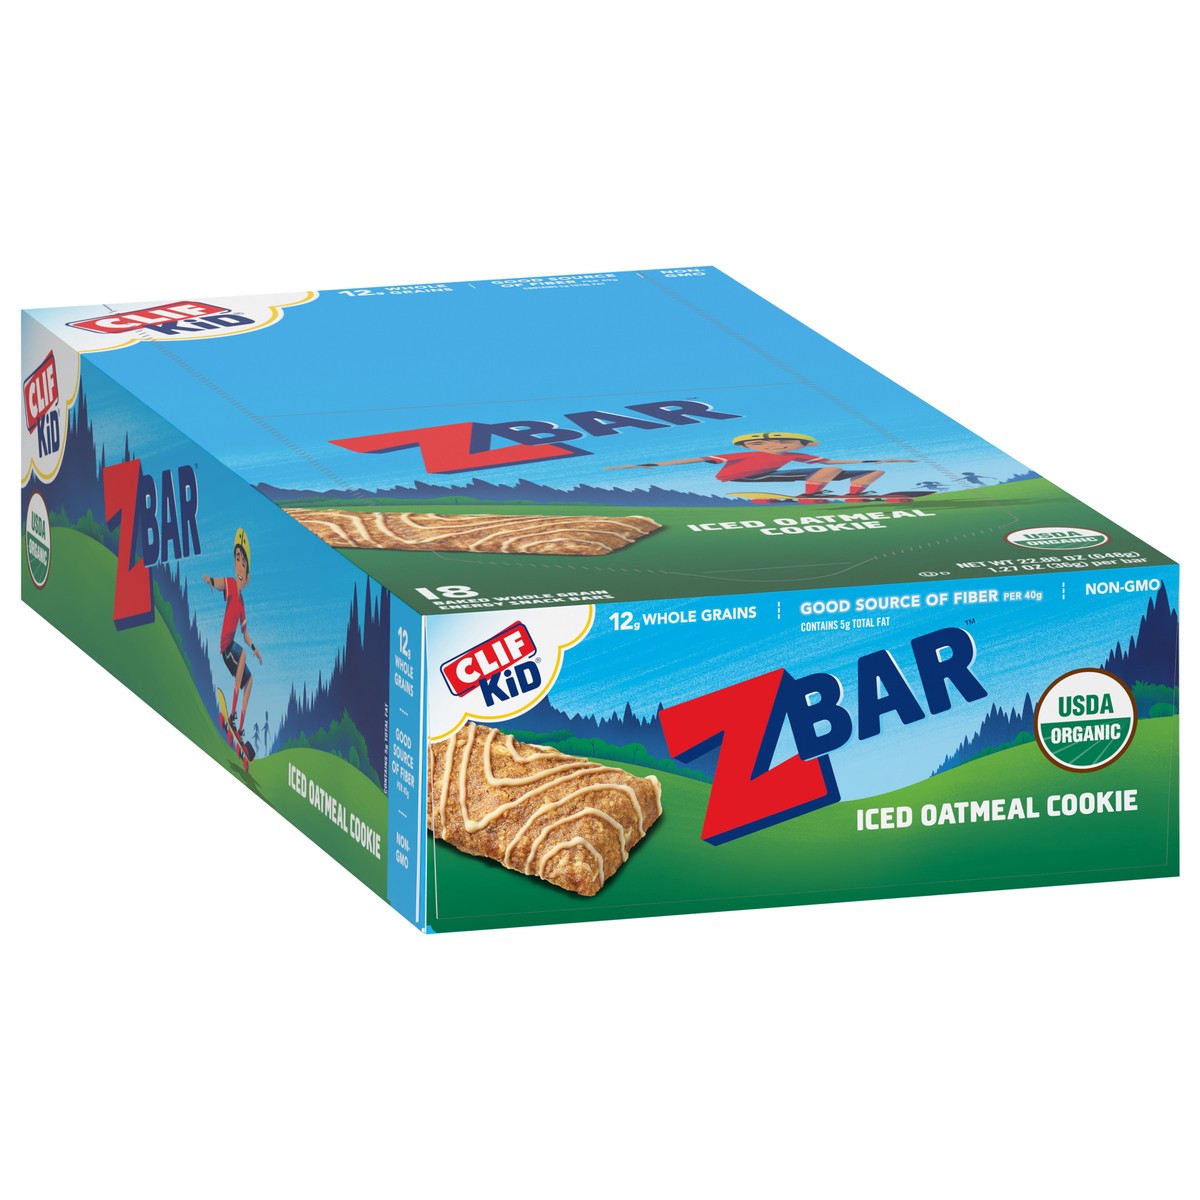 slide 8 of 12, CLIF Kid Zbar - Iced Oatmeal Cookie - Soft Baked Whole Grain Snack Bars - USDA Organic - Non-GMO - Plant-Based - 1.27 oz. (18 Count), 22.86 oz